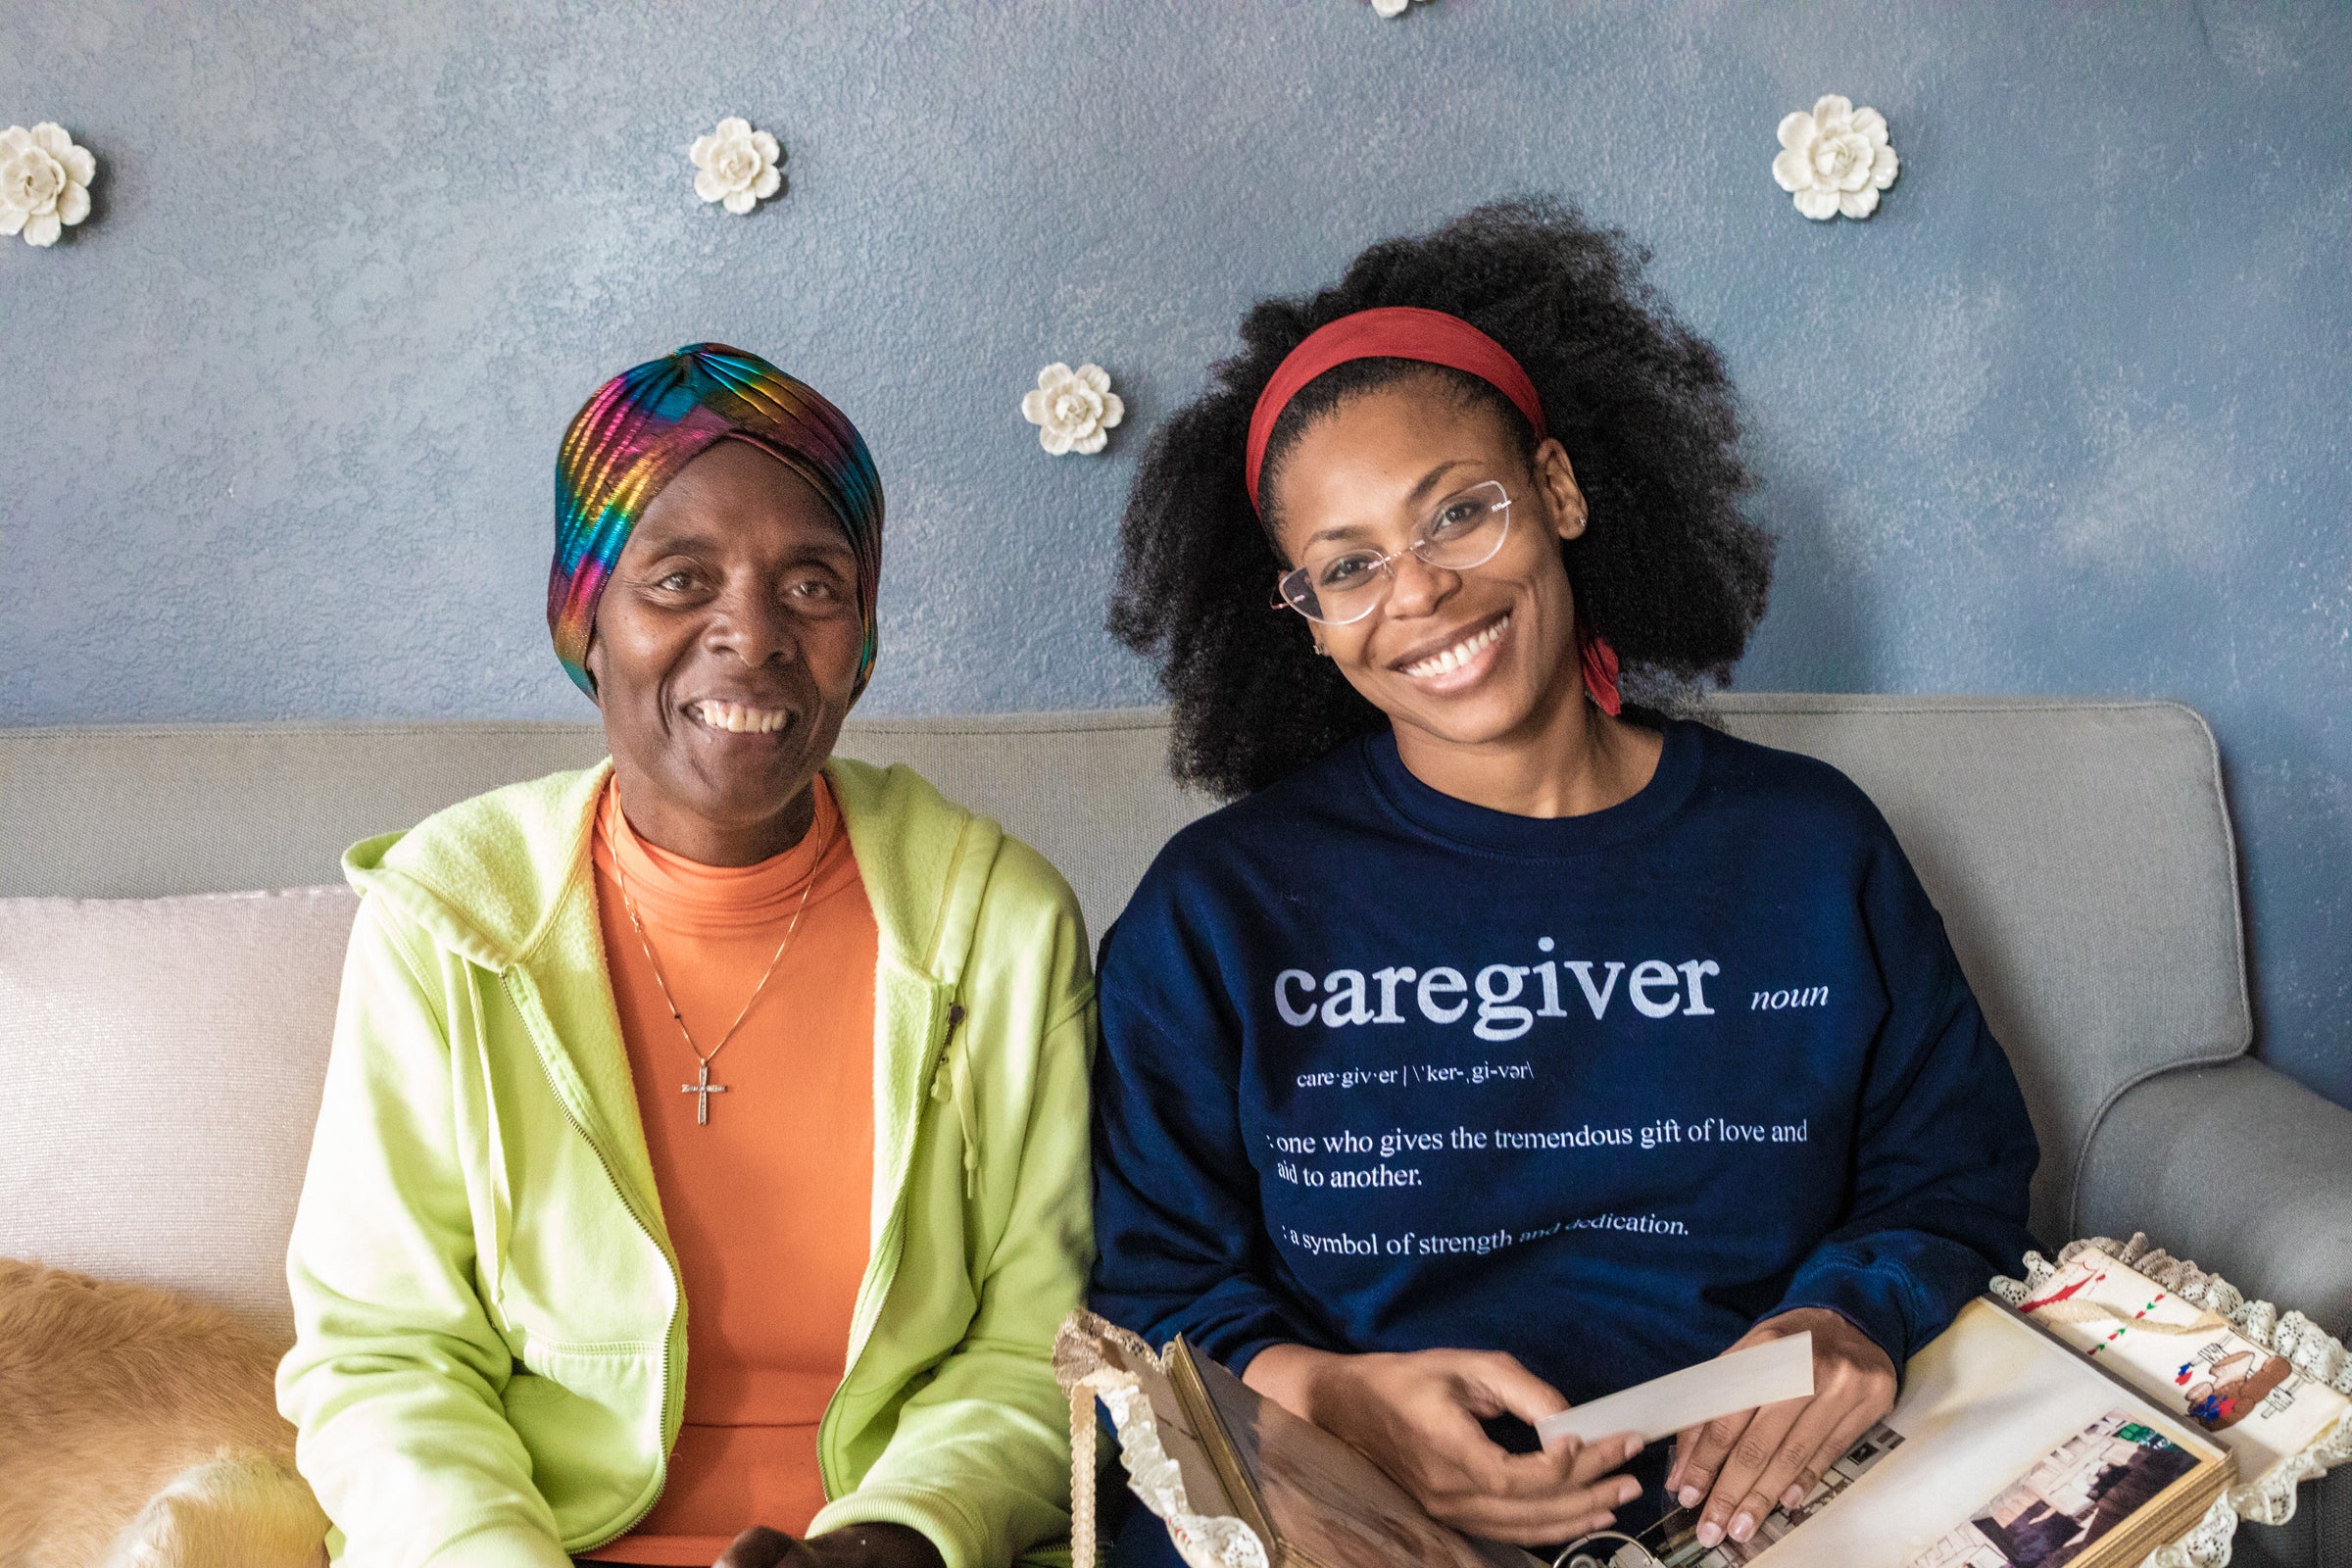 It took me a long time to identify as a caregiver. But I realized that there is so much freedom in acceptance. Acceptance has allowed me to embrace what it means to be a Caregiver...my way.